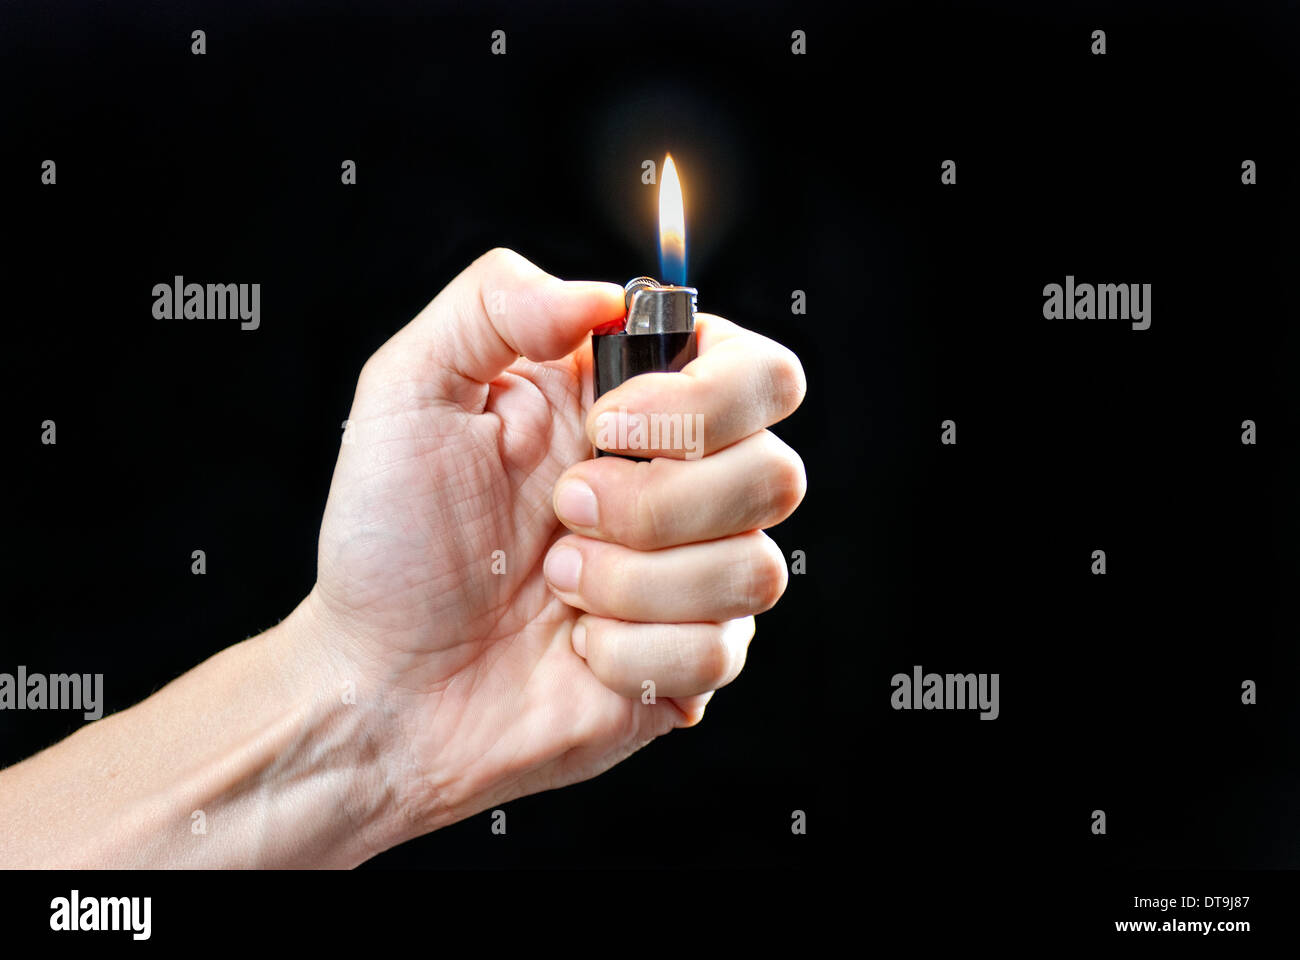 Close-up of a man's hand holding a lit lighter. Stock Photo